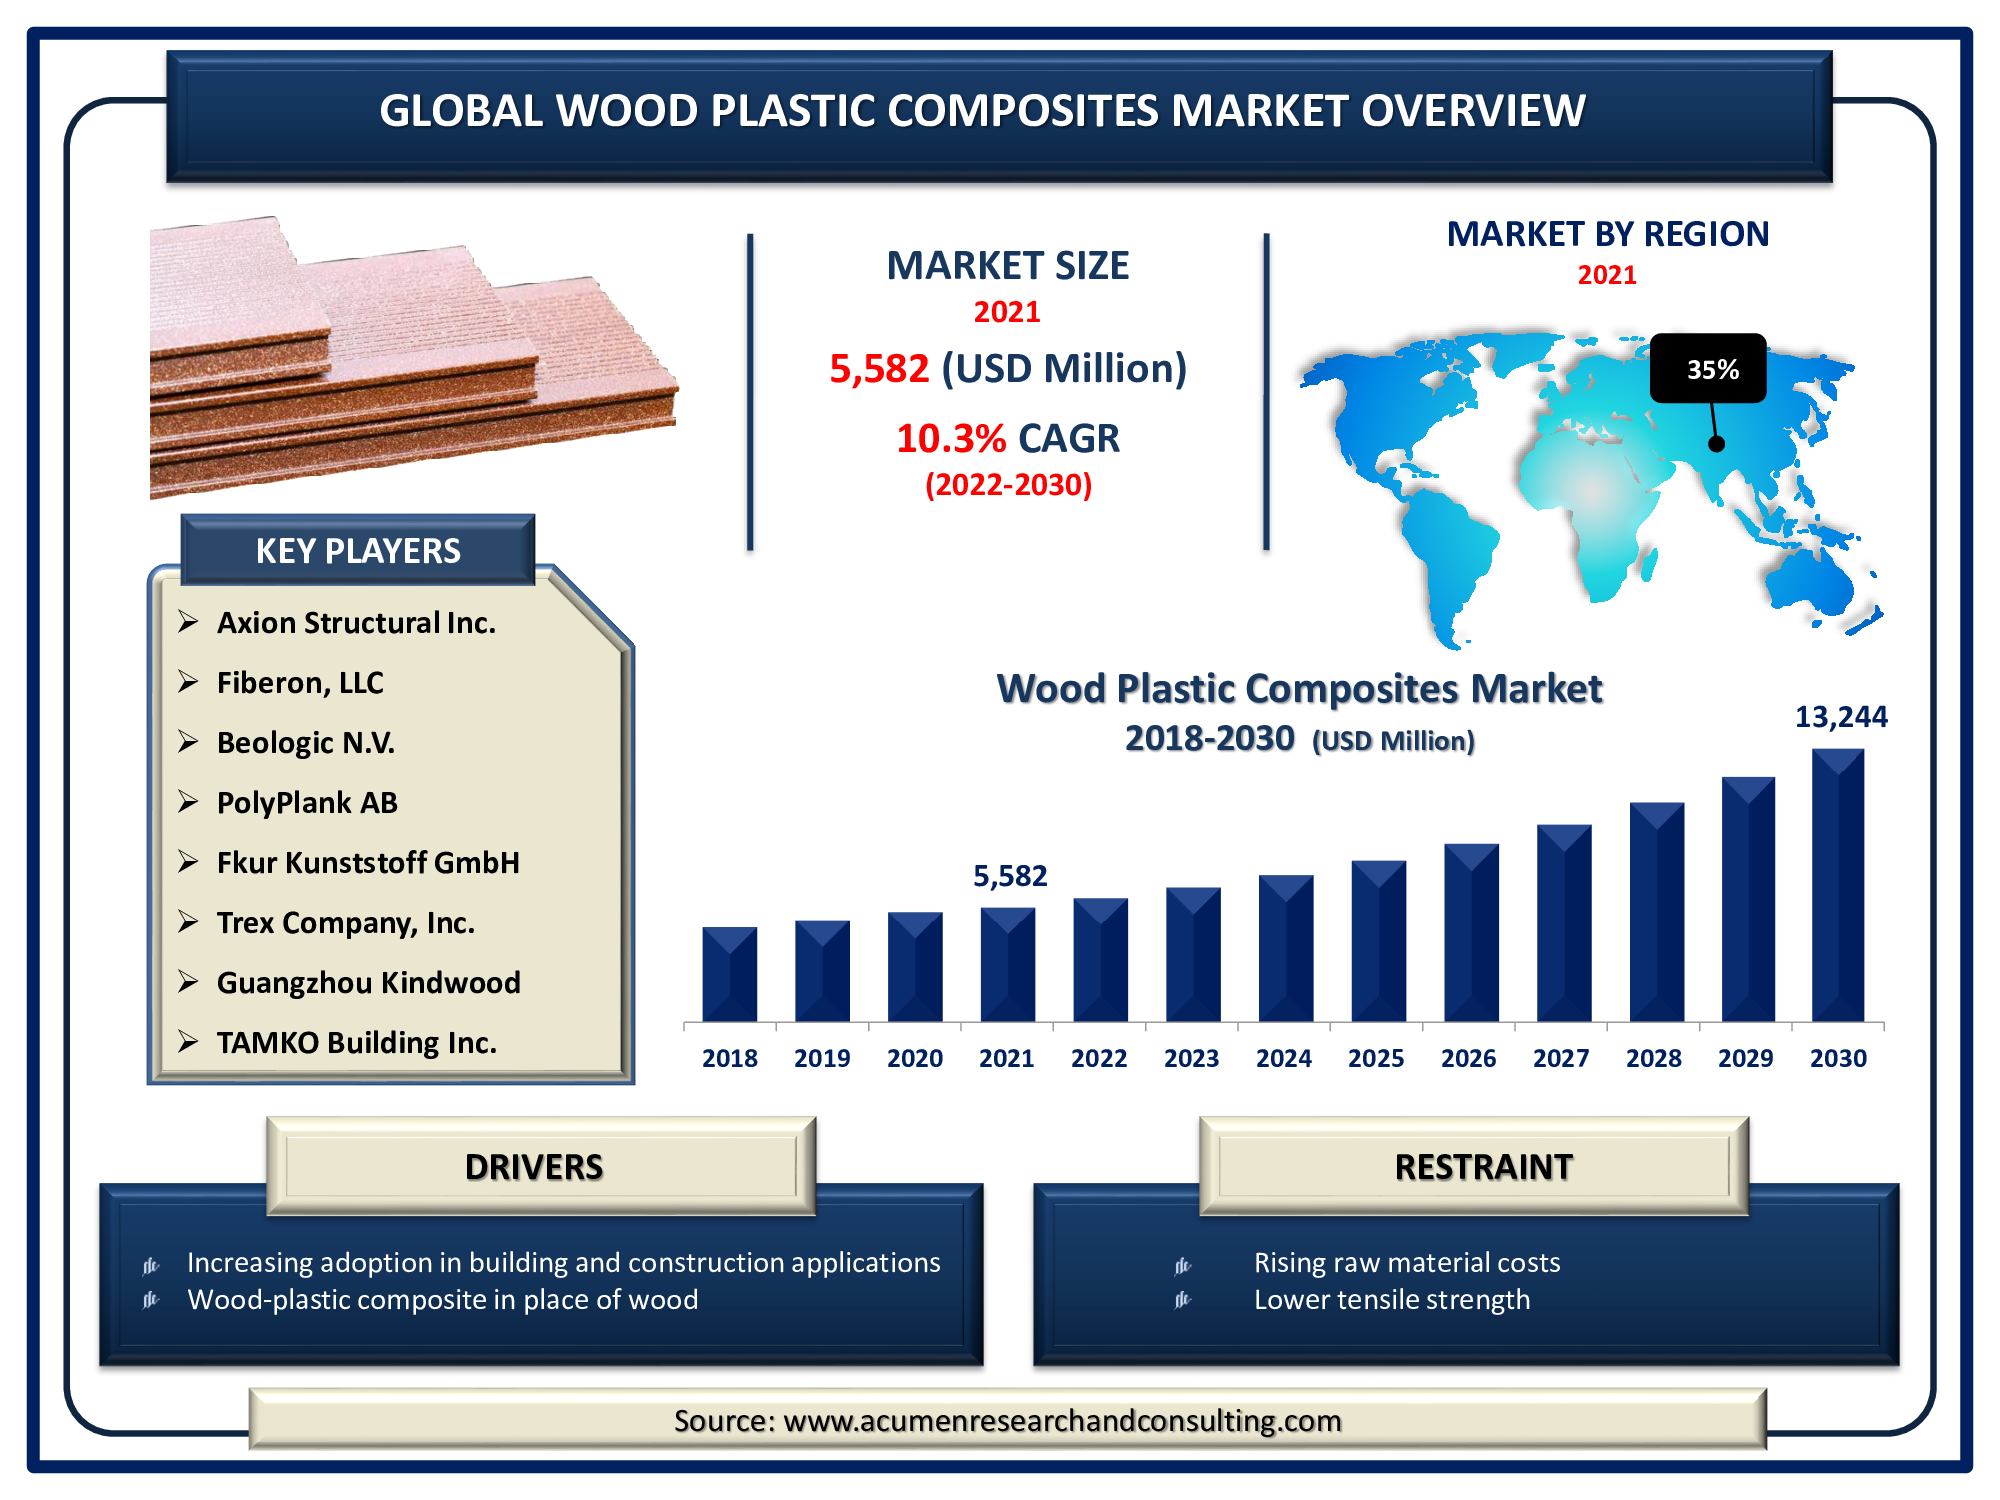 Wood Plastic Composites Market size accounted for USD 5,582 Million in 2021 and is expected to reach USD 13,244 Million by 2030 with a considerable CAGR of 10.3% during the forecast period from 2022 to 2030.